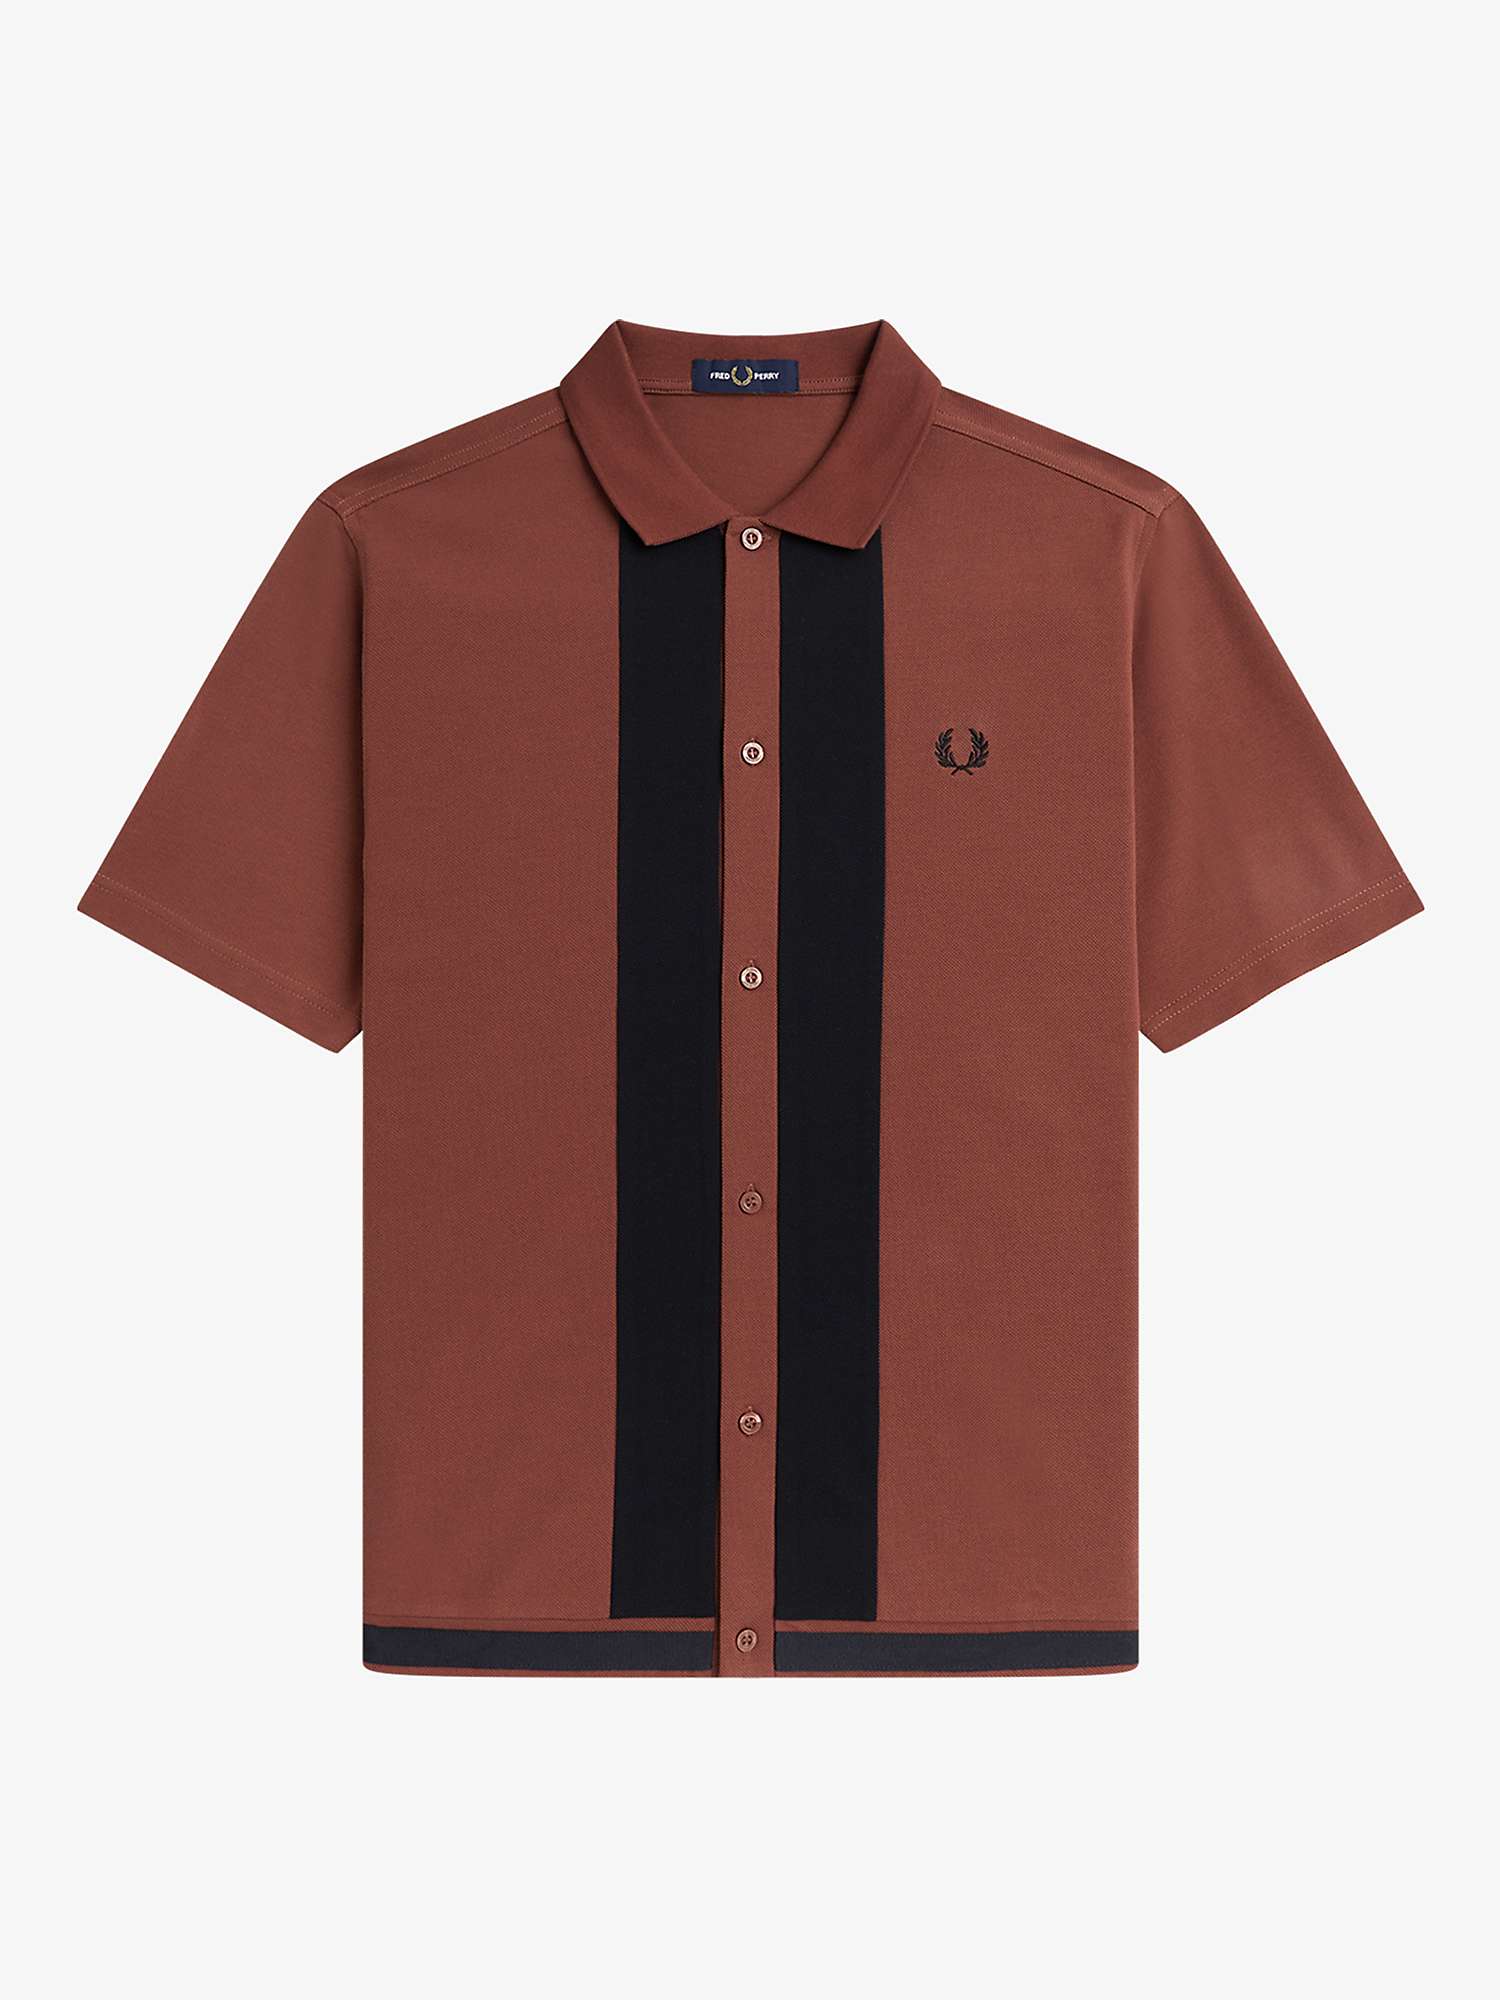 Buy Fred Perry Short Sleeve Panel Polo Shirt, Brown/Black Online at johnlewis.com